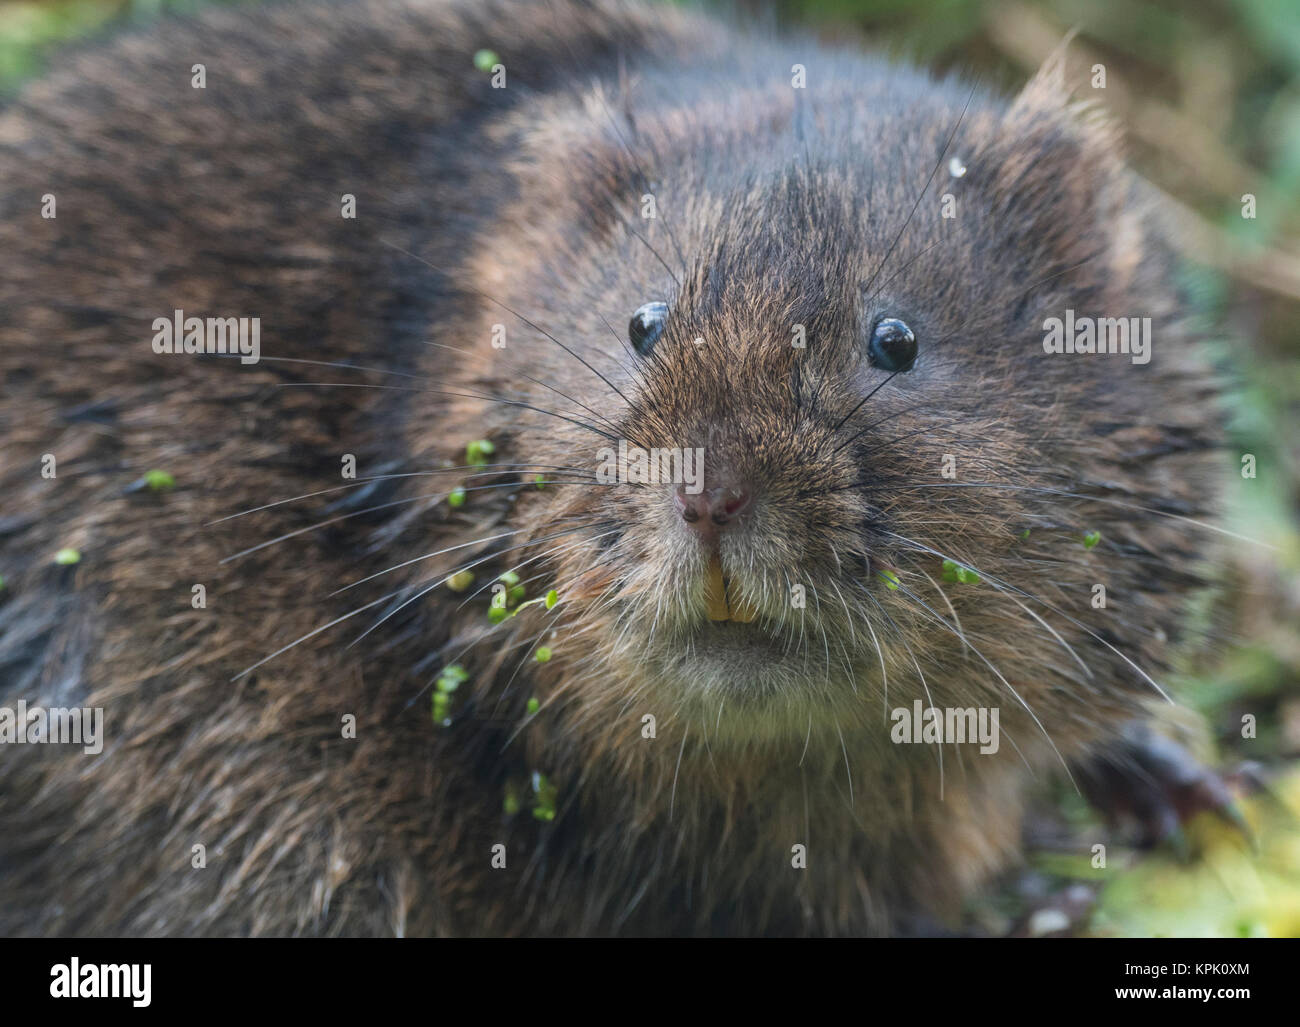 Water vole sat on a stream or river bank Stock Photo